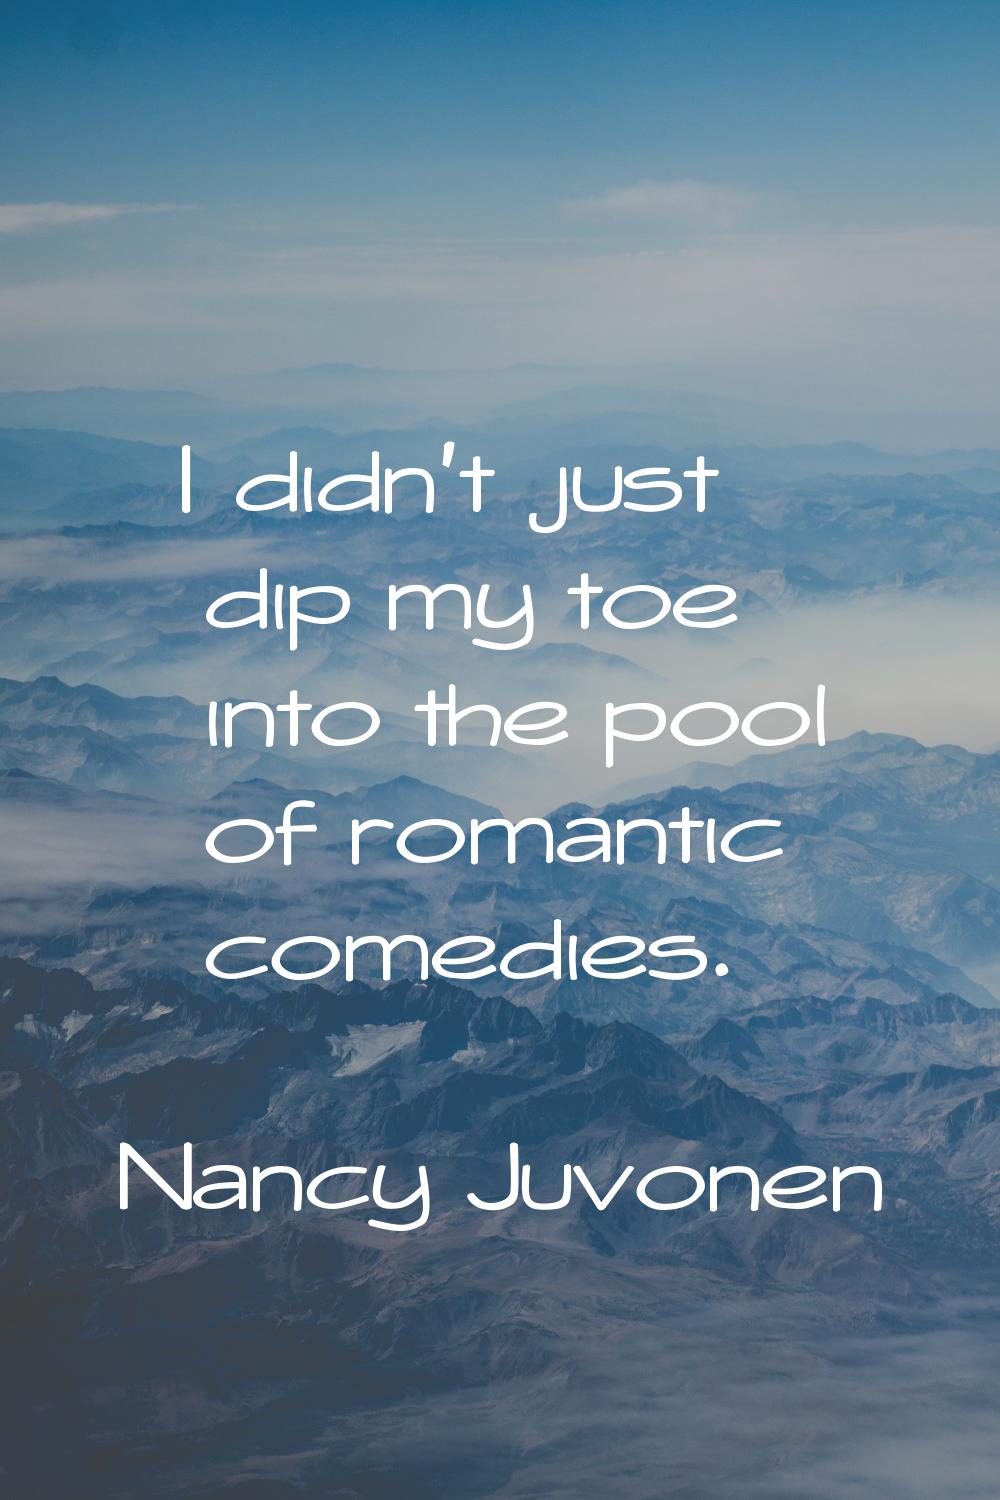 I didn't just dip my toe into the pool of romantic comedies.